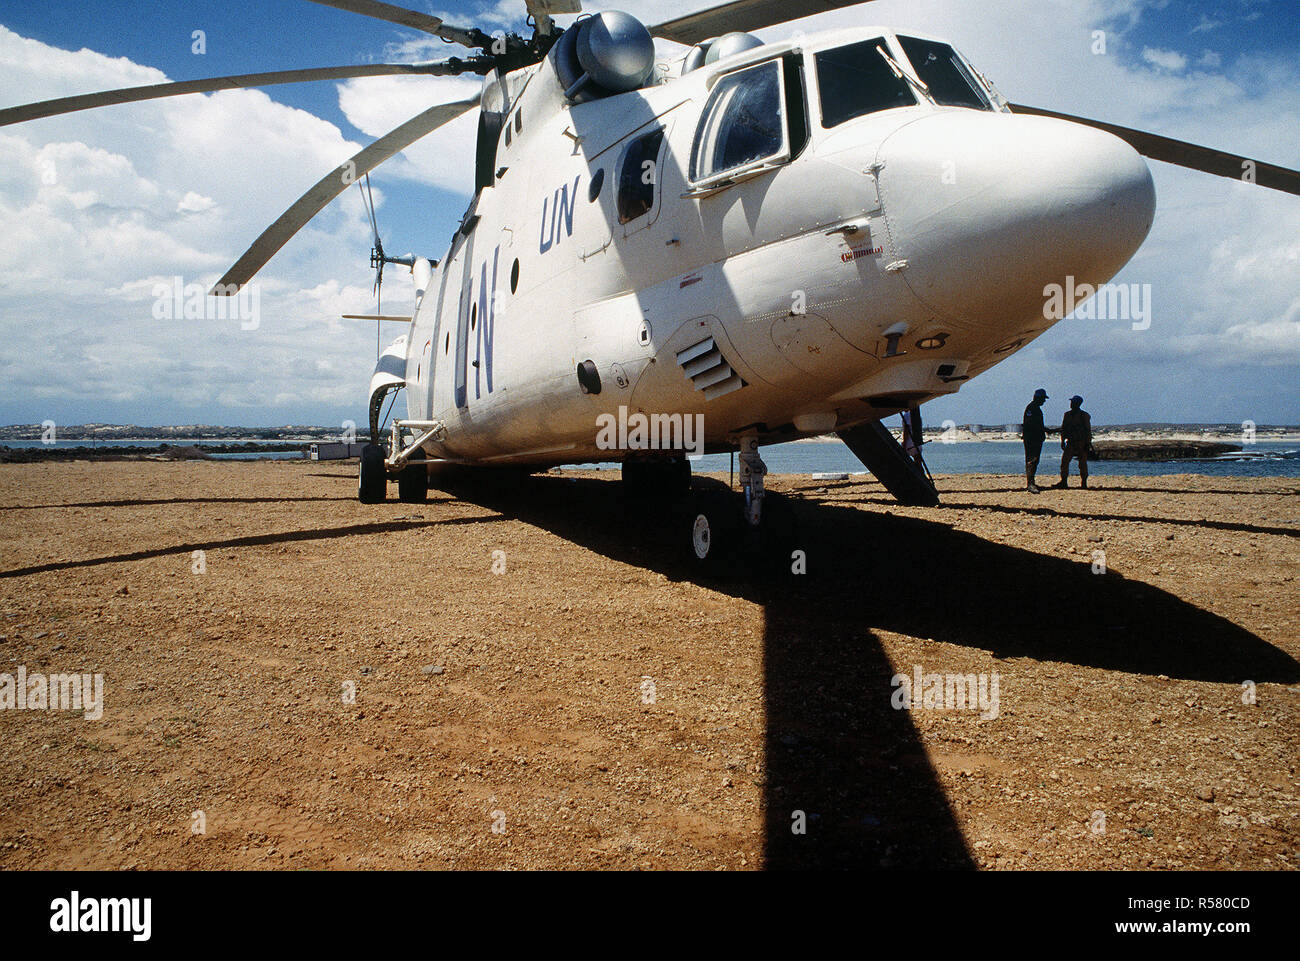 A Russian made Mi-26 Halo helicopter on the shores of Kismayo, Somalia.  The Mi-26 Halo is used to shuttle supplies and personnel to areas outside Mogadishu during Operation CONTINUE HOPE. Stock Photo